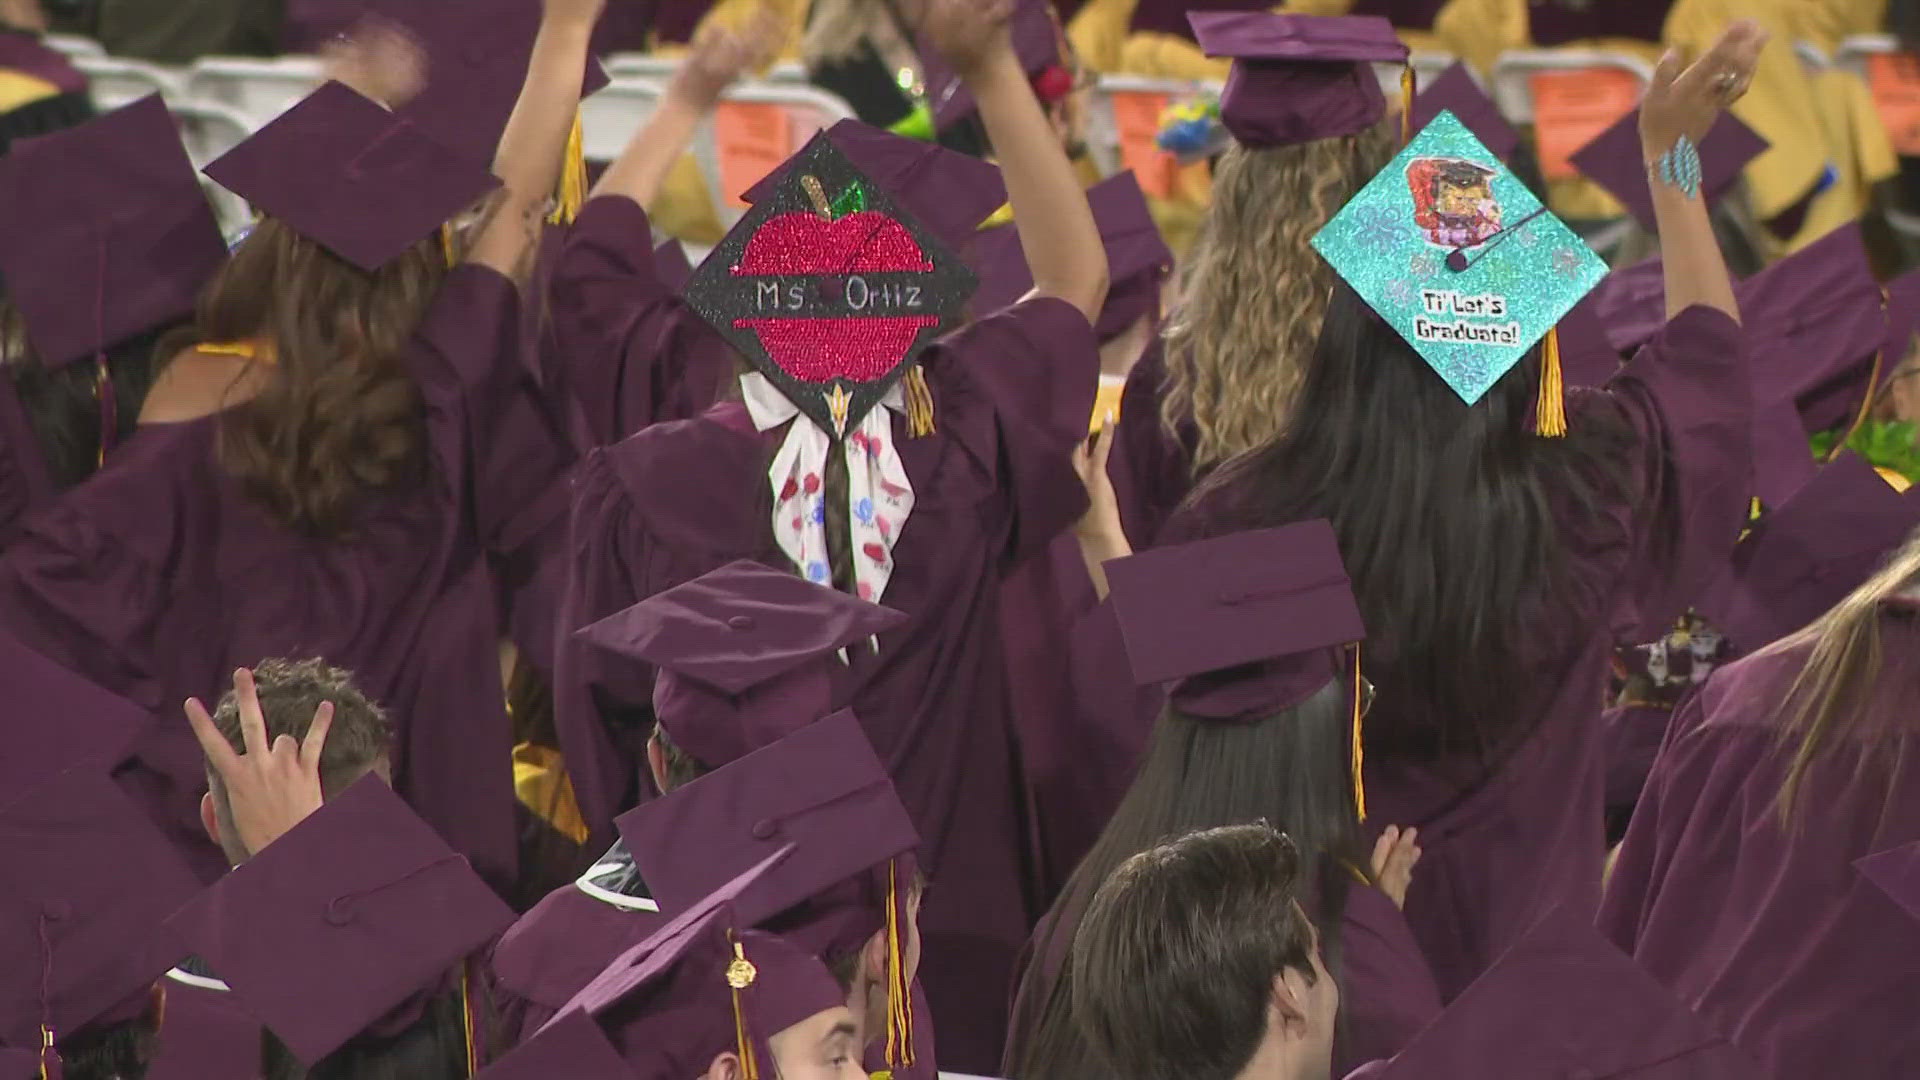 20,000 students are graduating from Arizona State University this spring and the university held their commencement ceremony Monday.